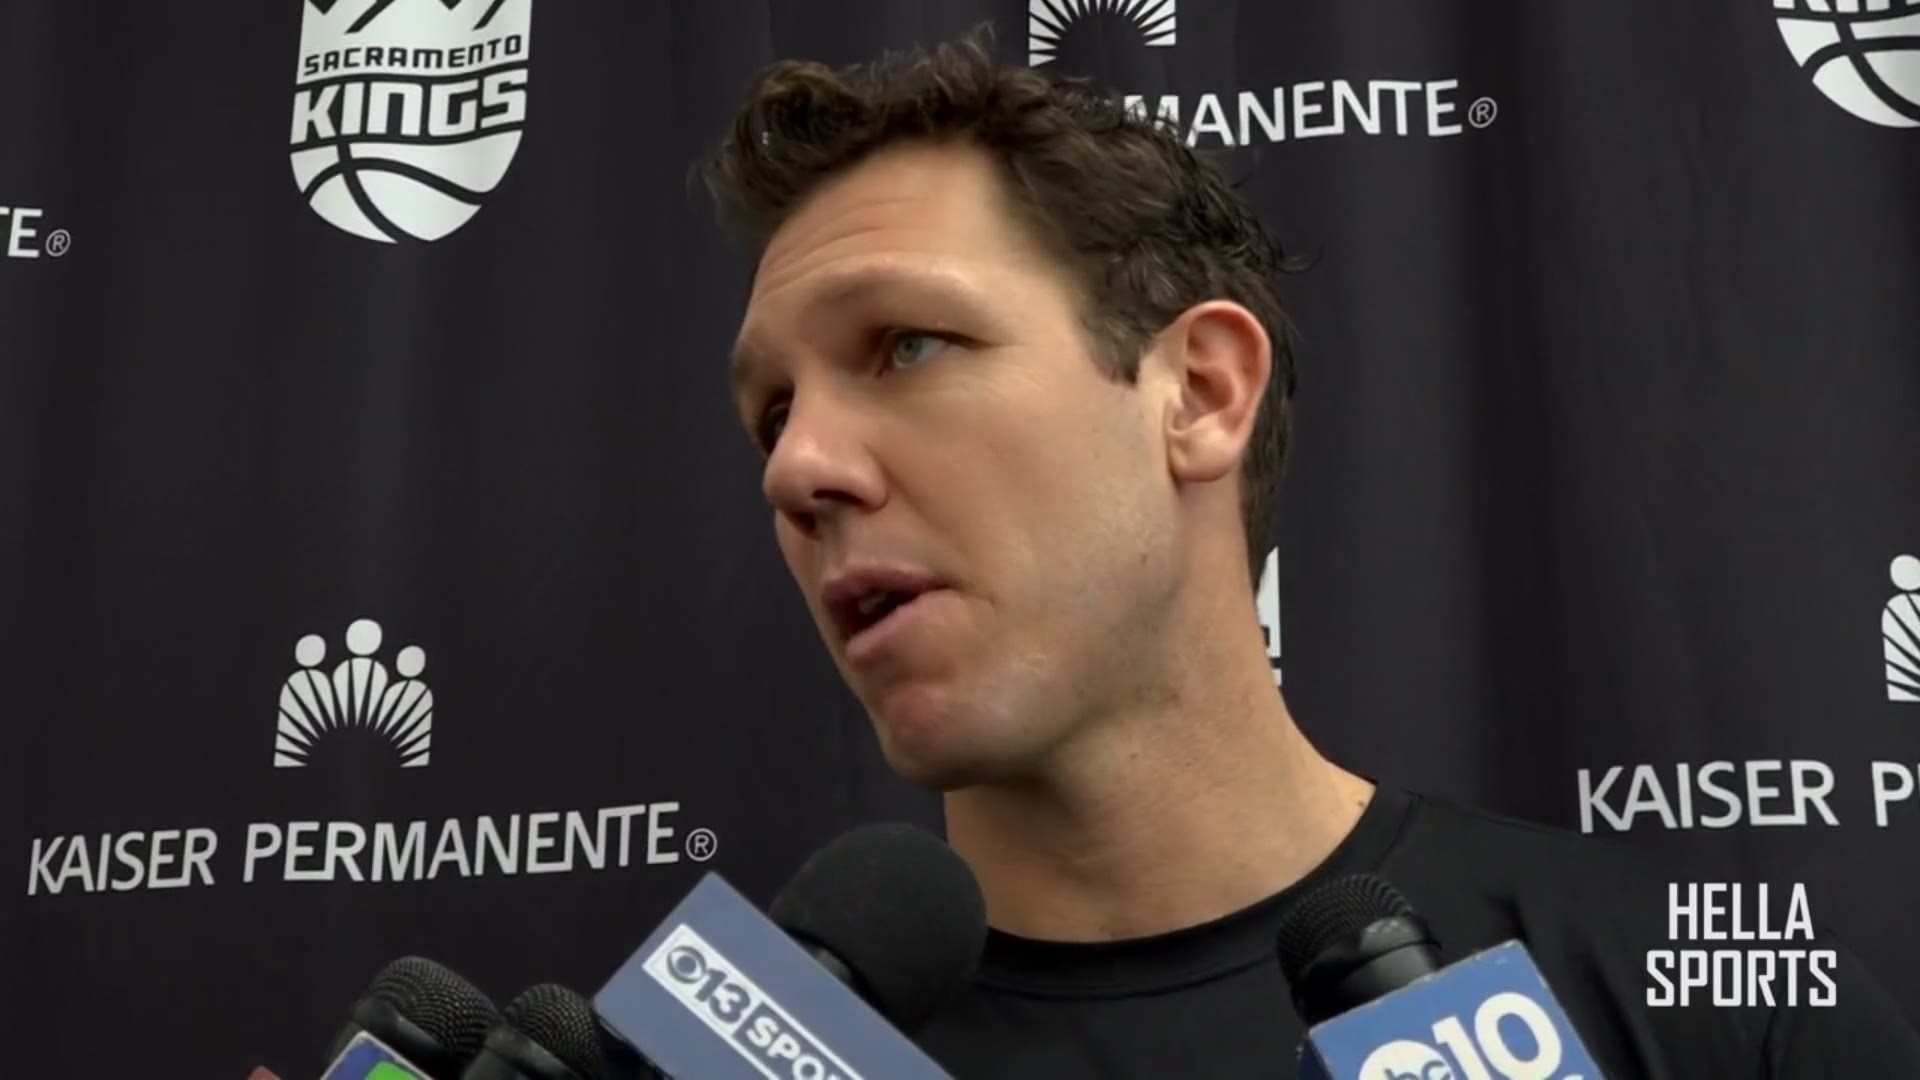 Kings coach Luke Walton discusses the team’s practice in Sacramento while the NBA’s trade deadline passed on Thursday afternoon.